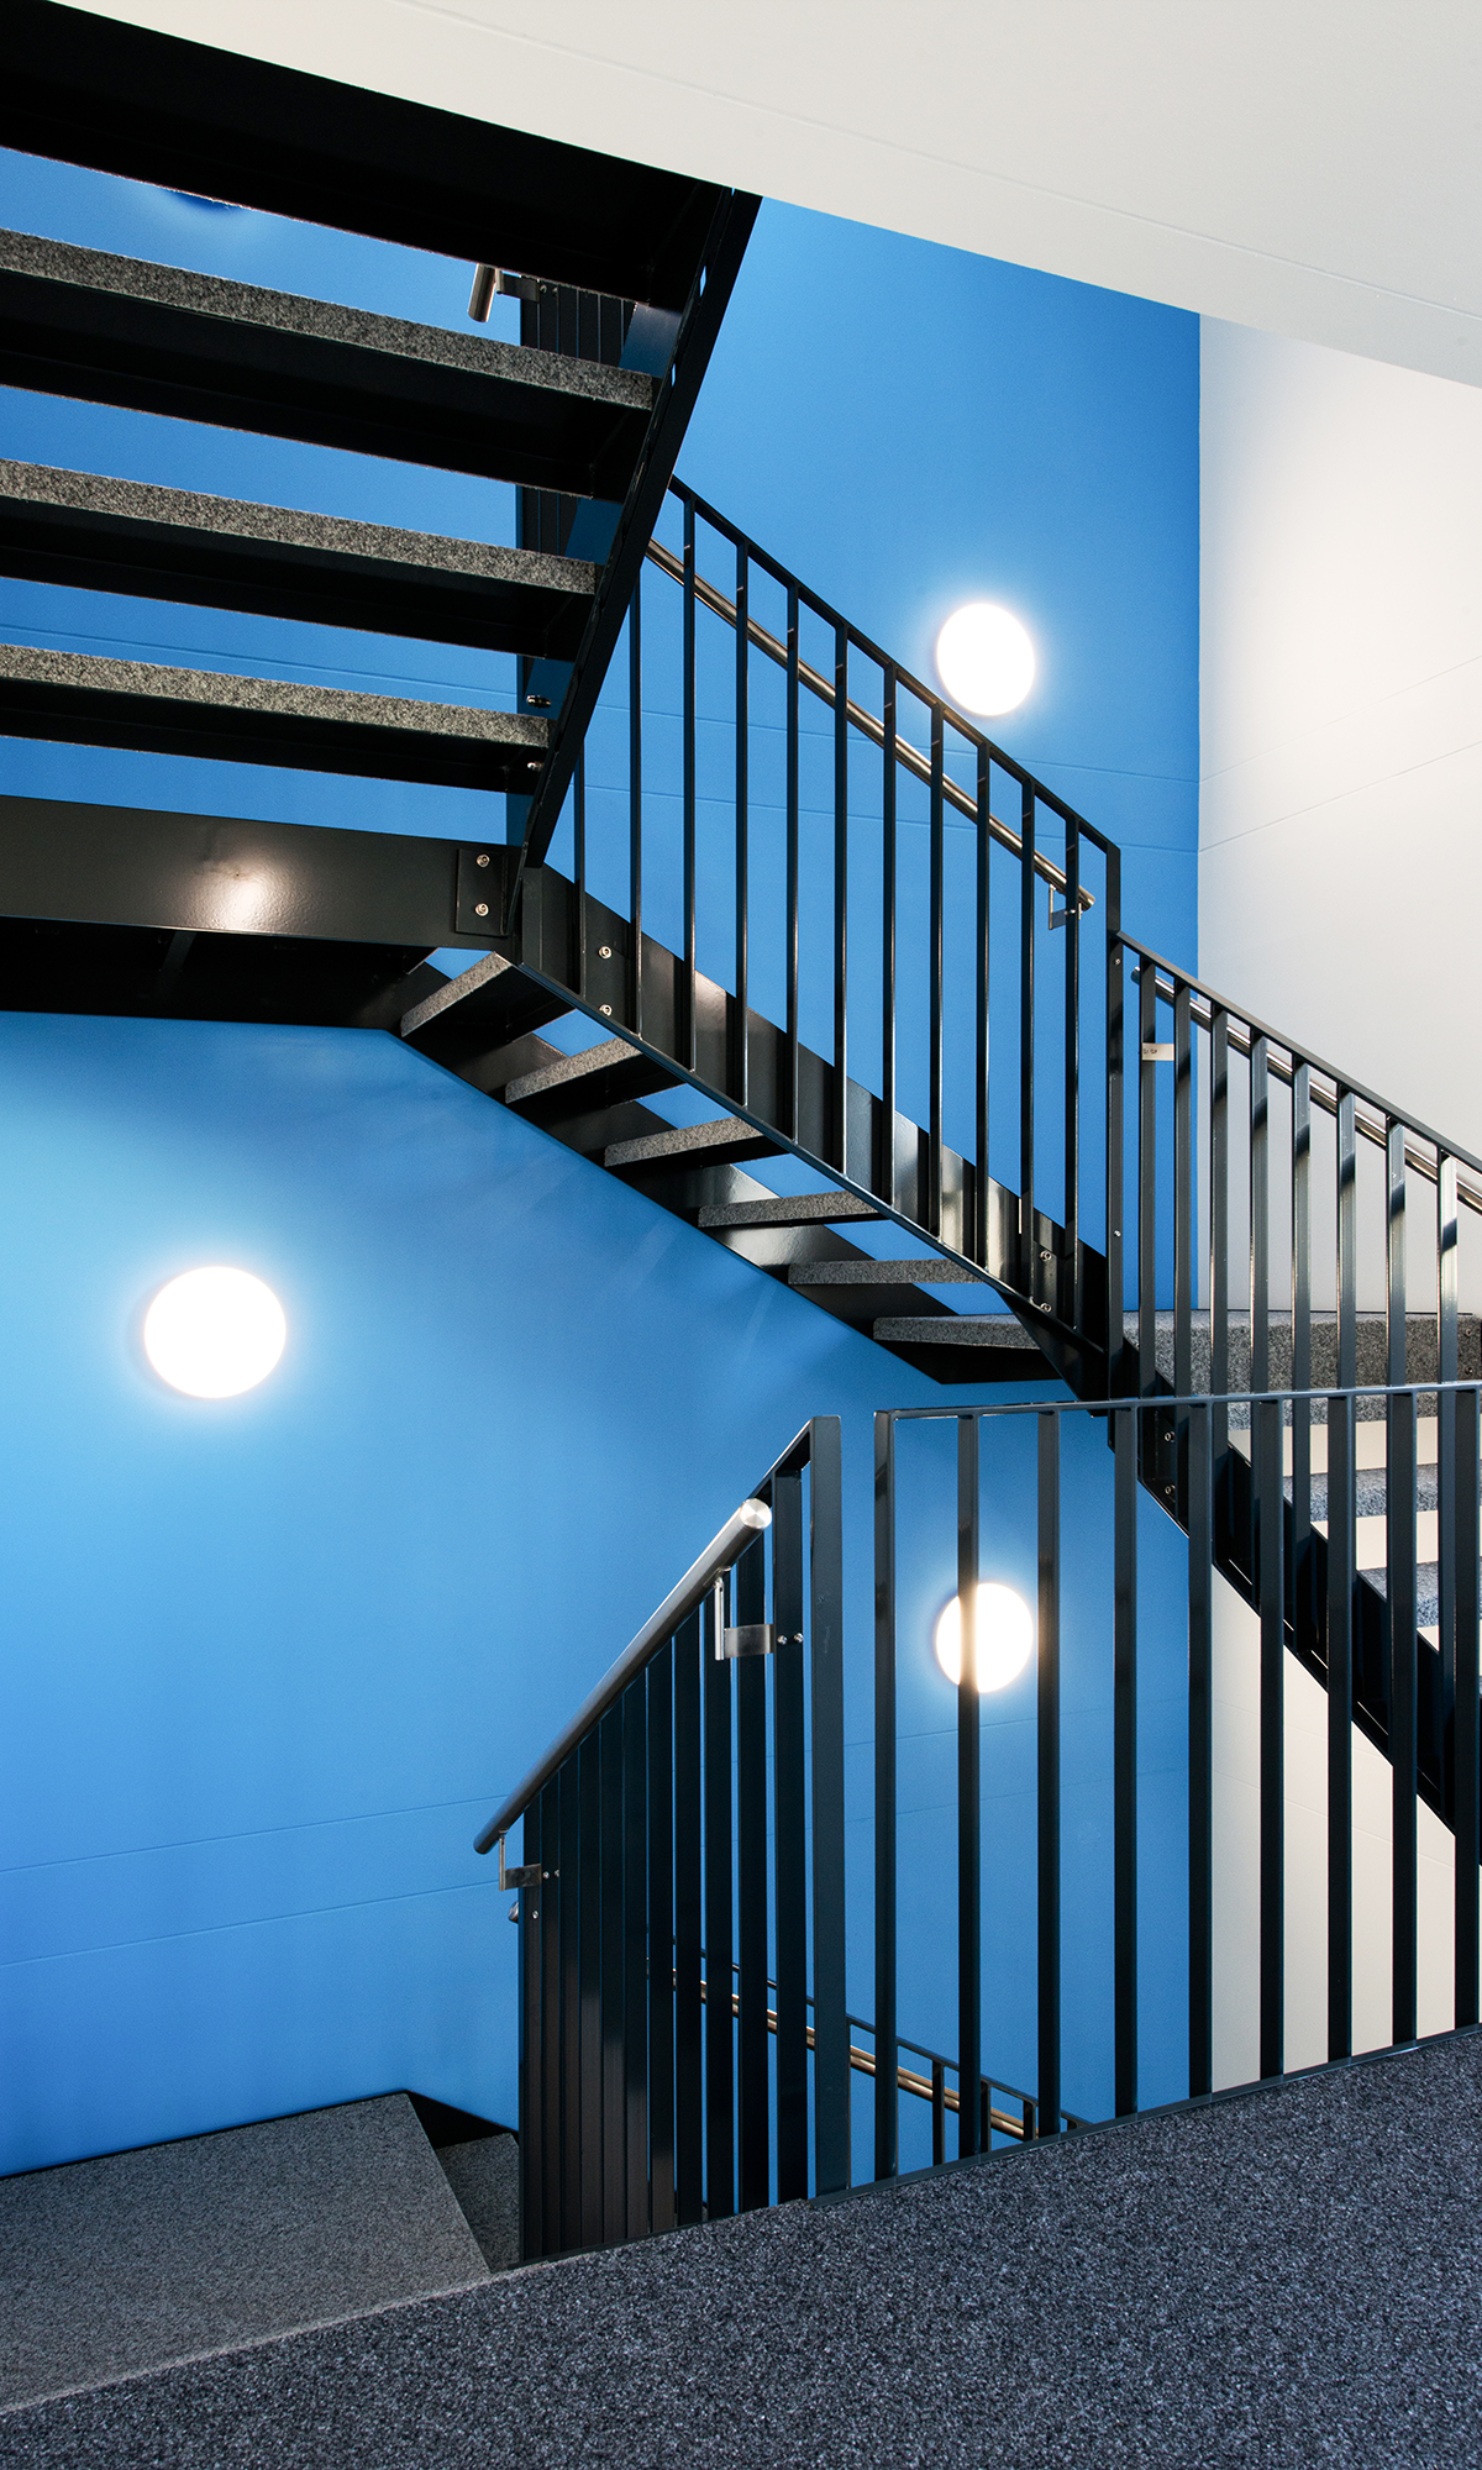 Stairwell with blue walls in the Lausanne transport authority’s temporary office building